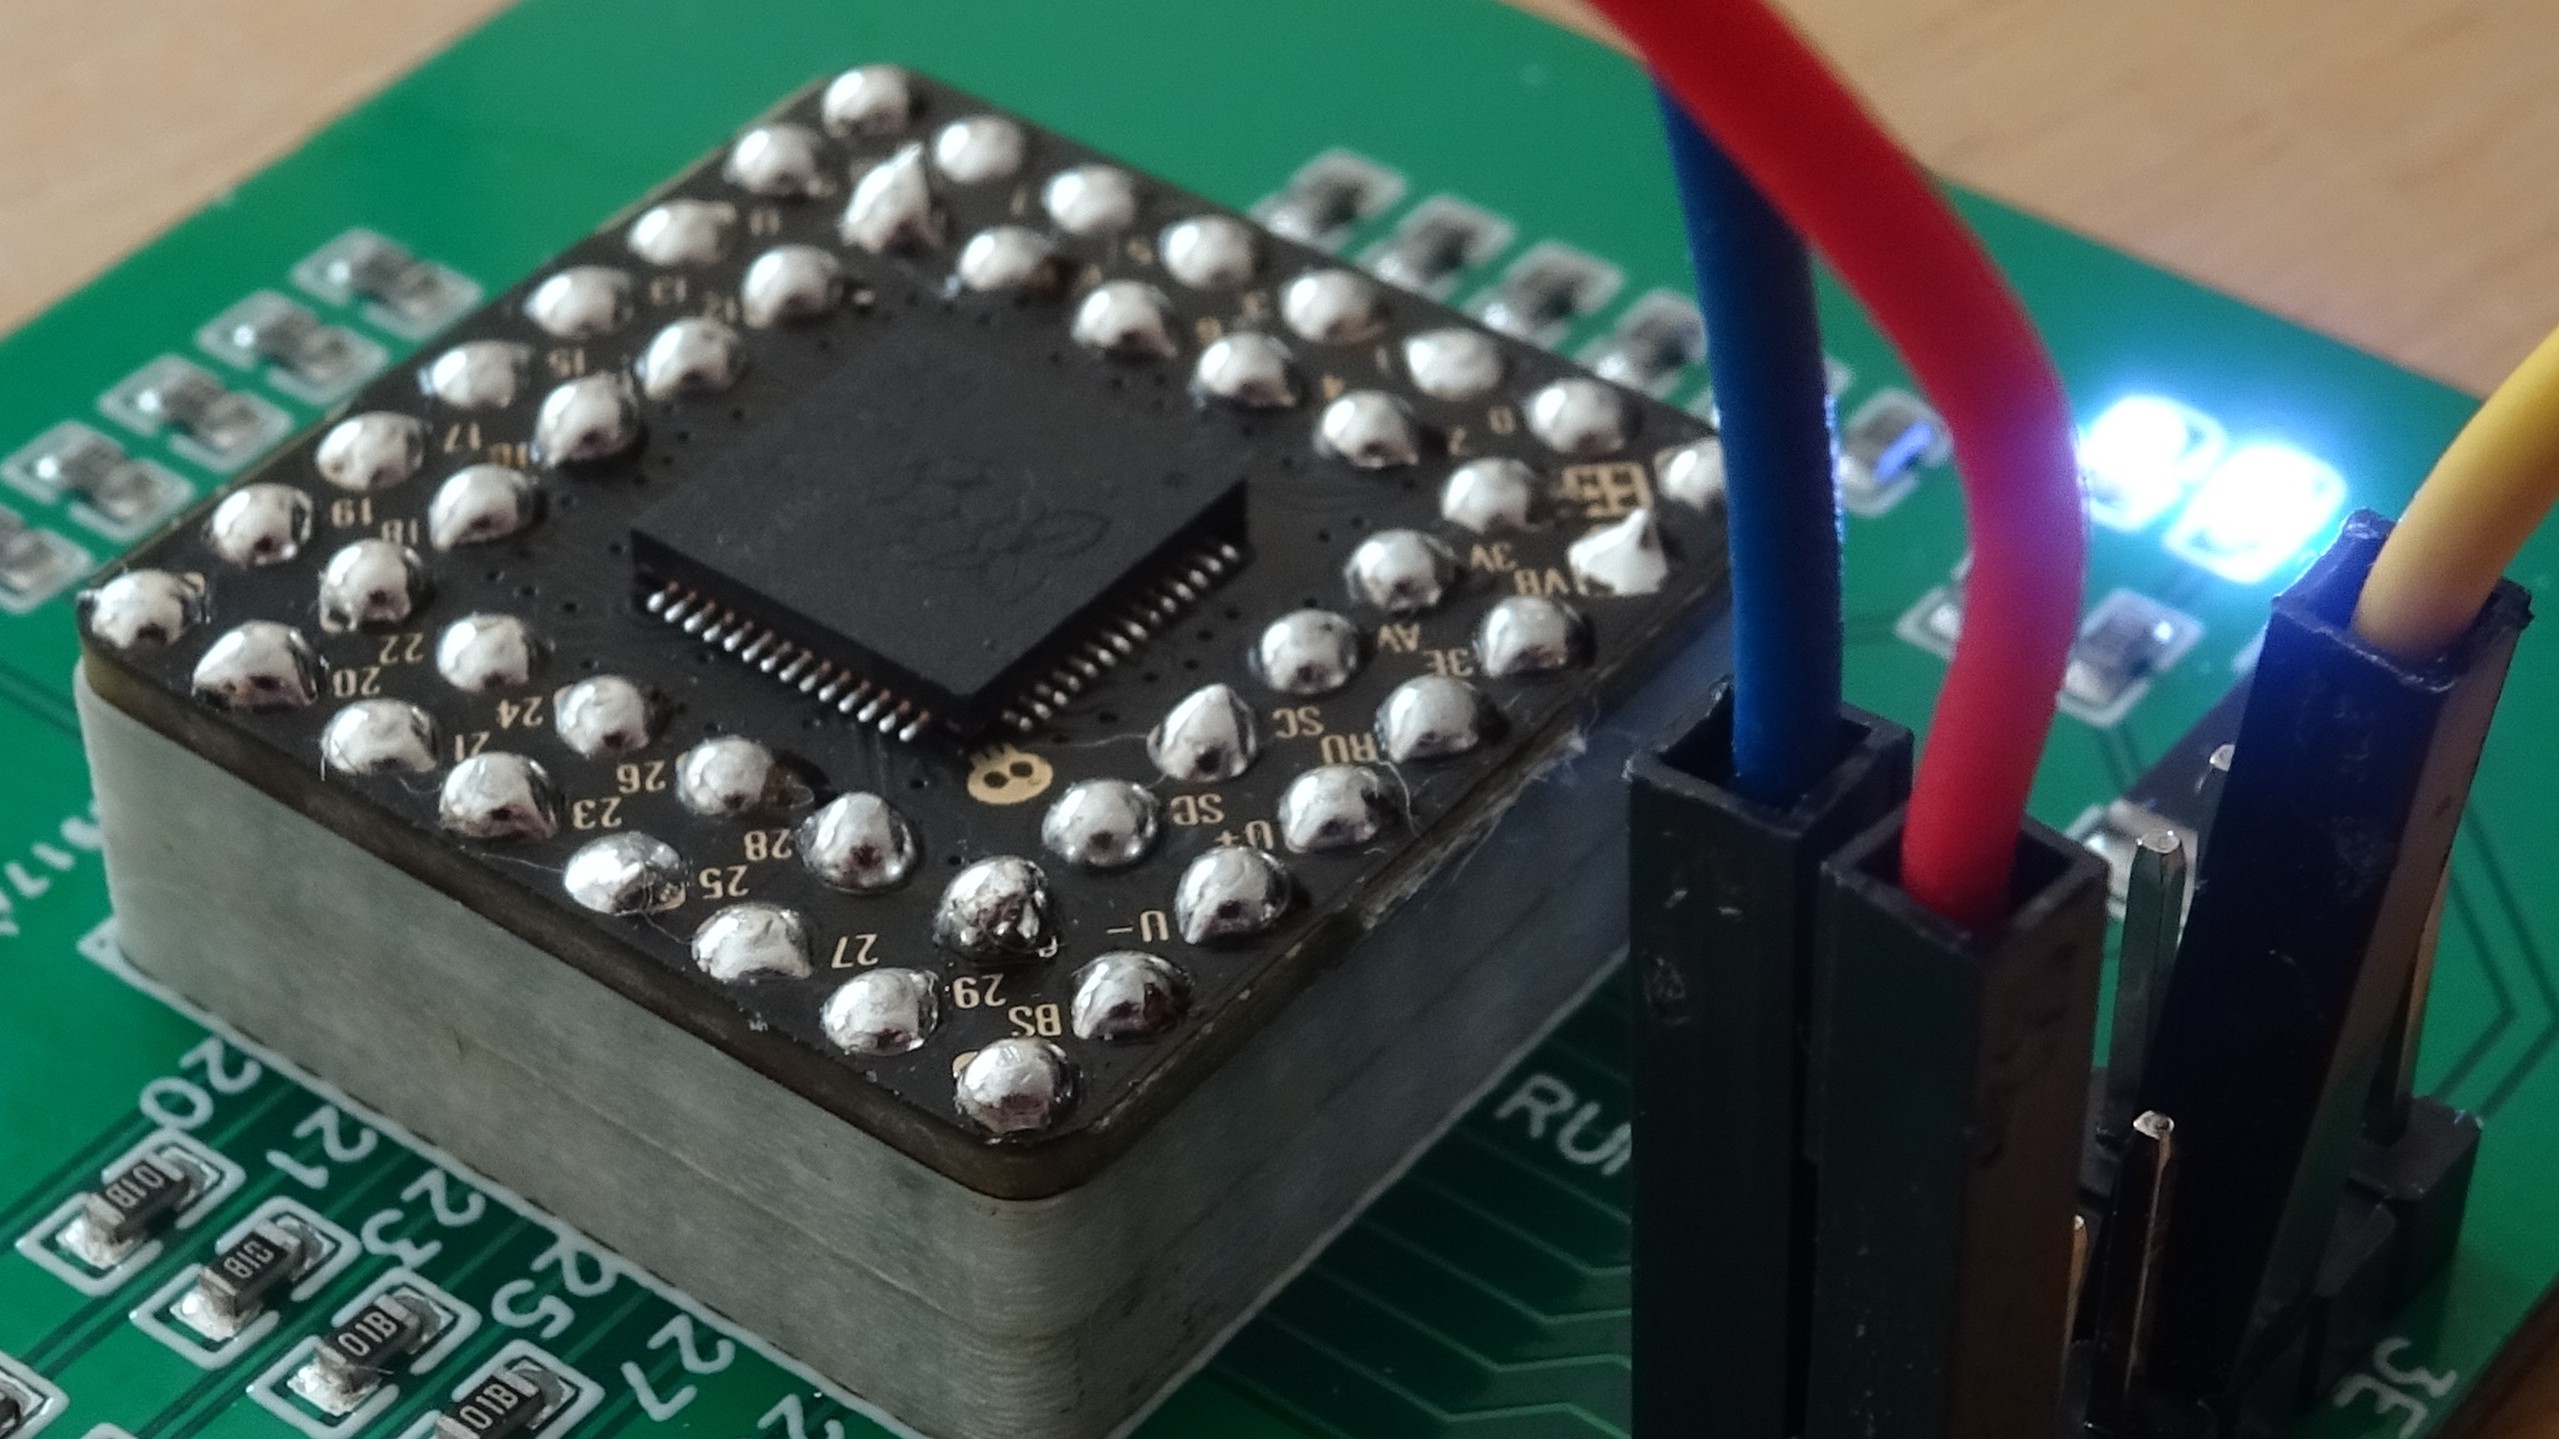 pimoroni-to-release-rp2040-breakout-for-maker-projects